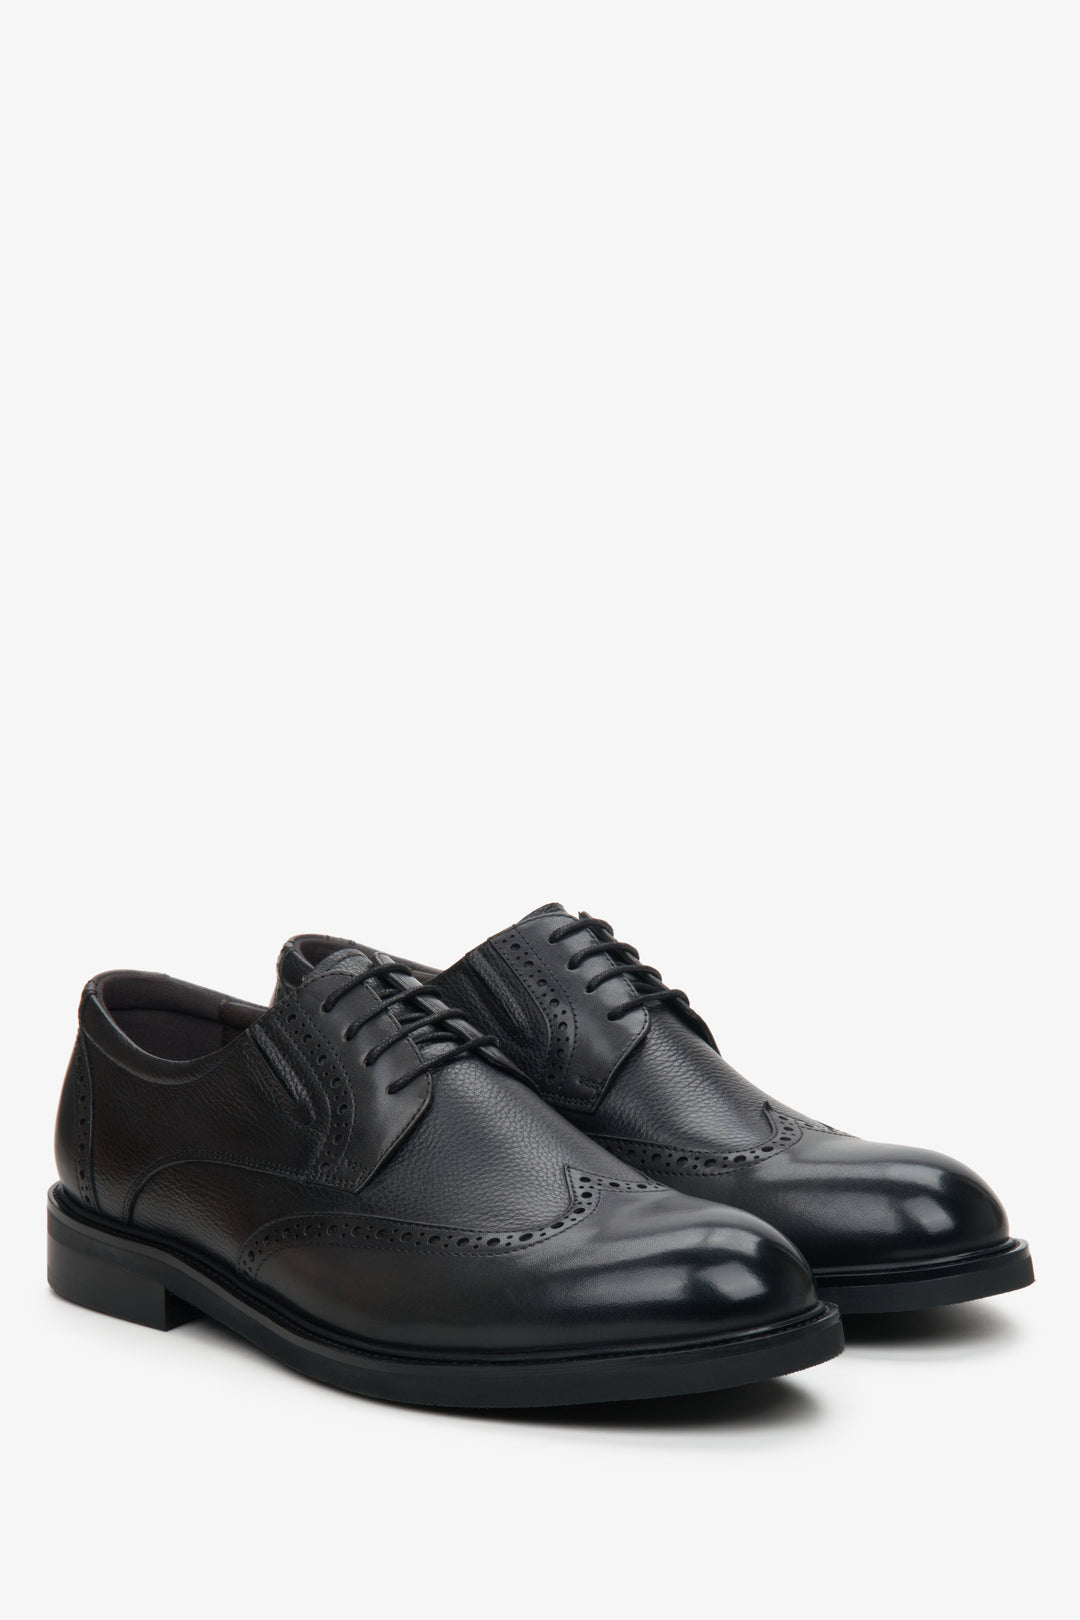 Men's black leather brogues by Estro with decorative perforations.